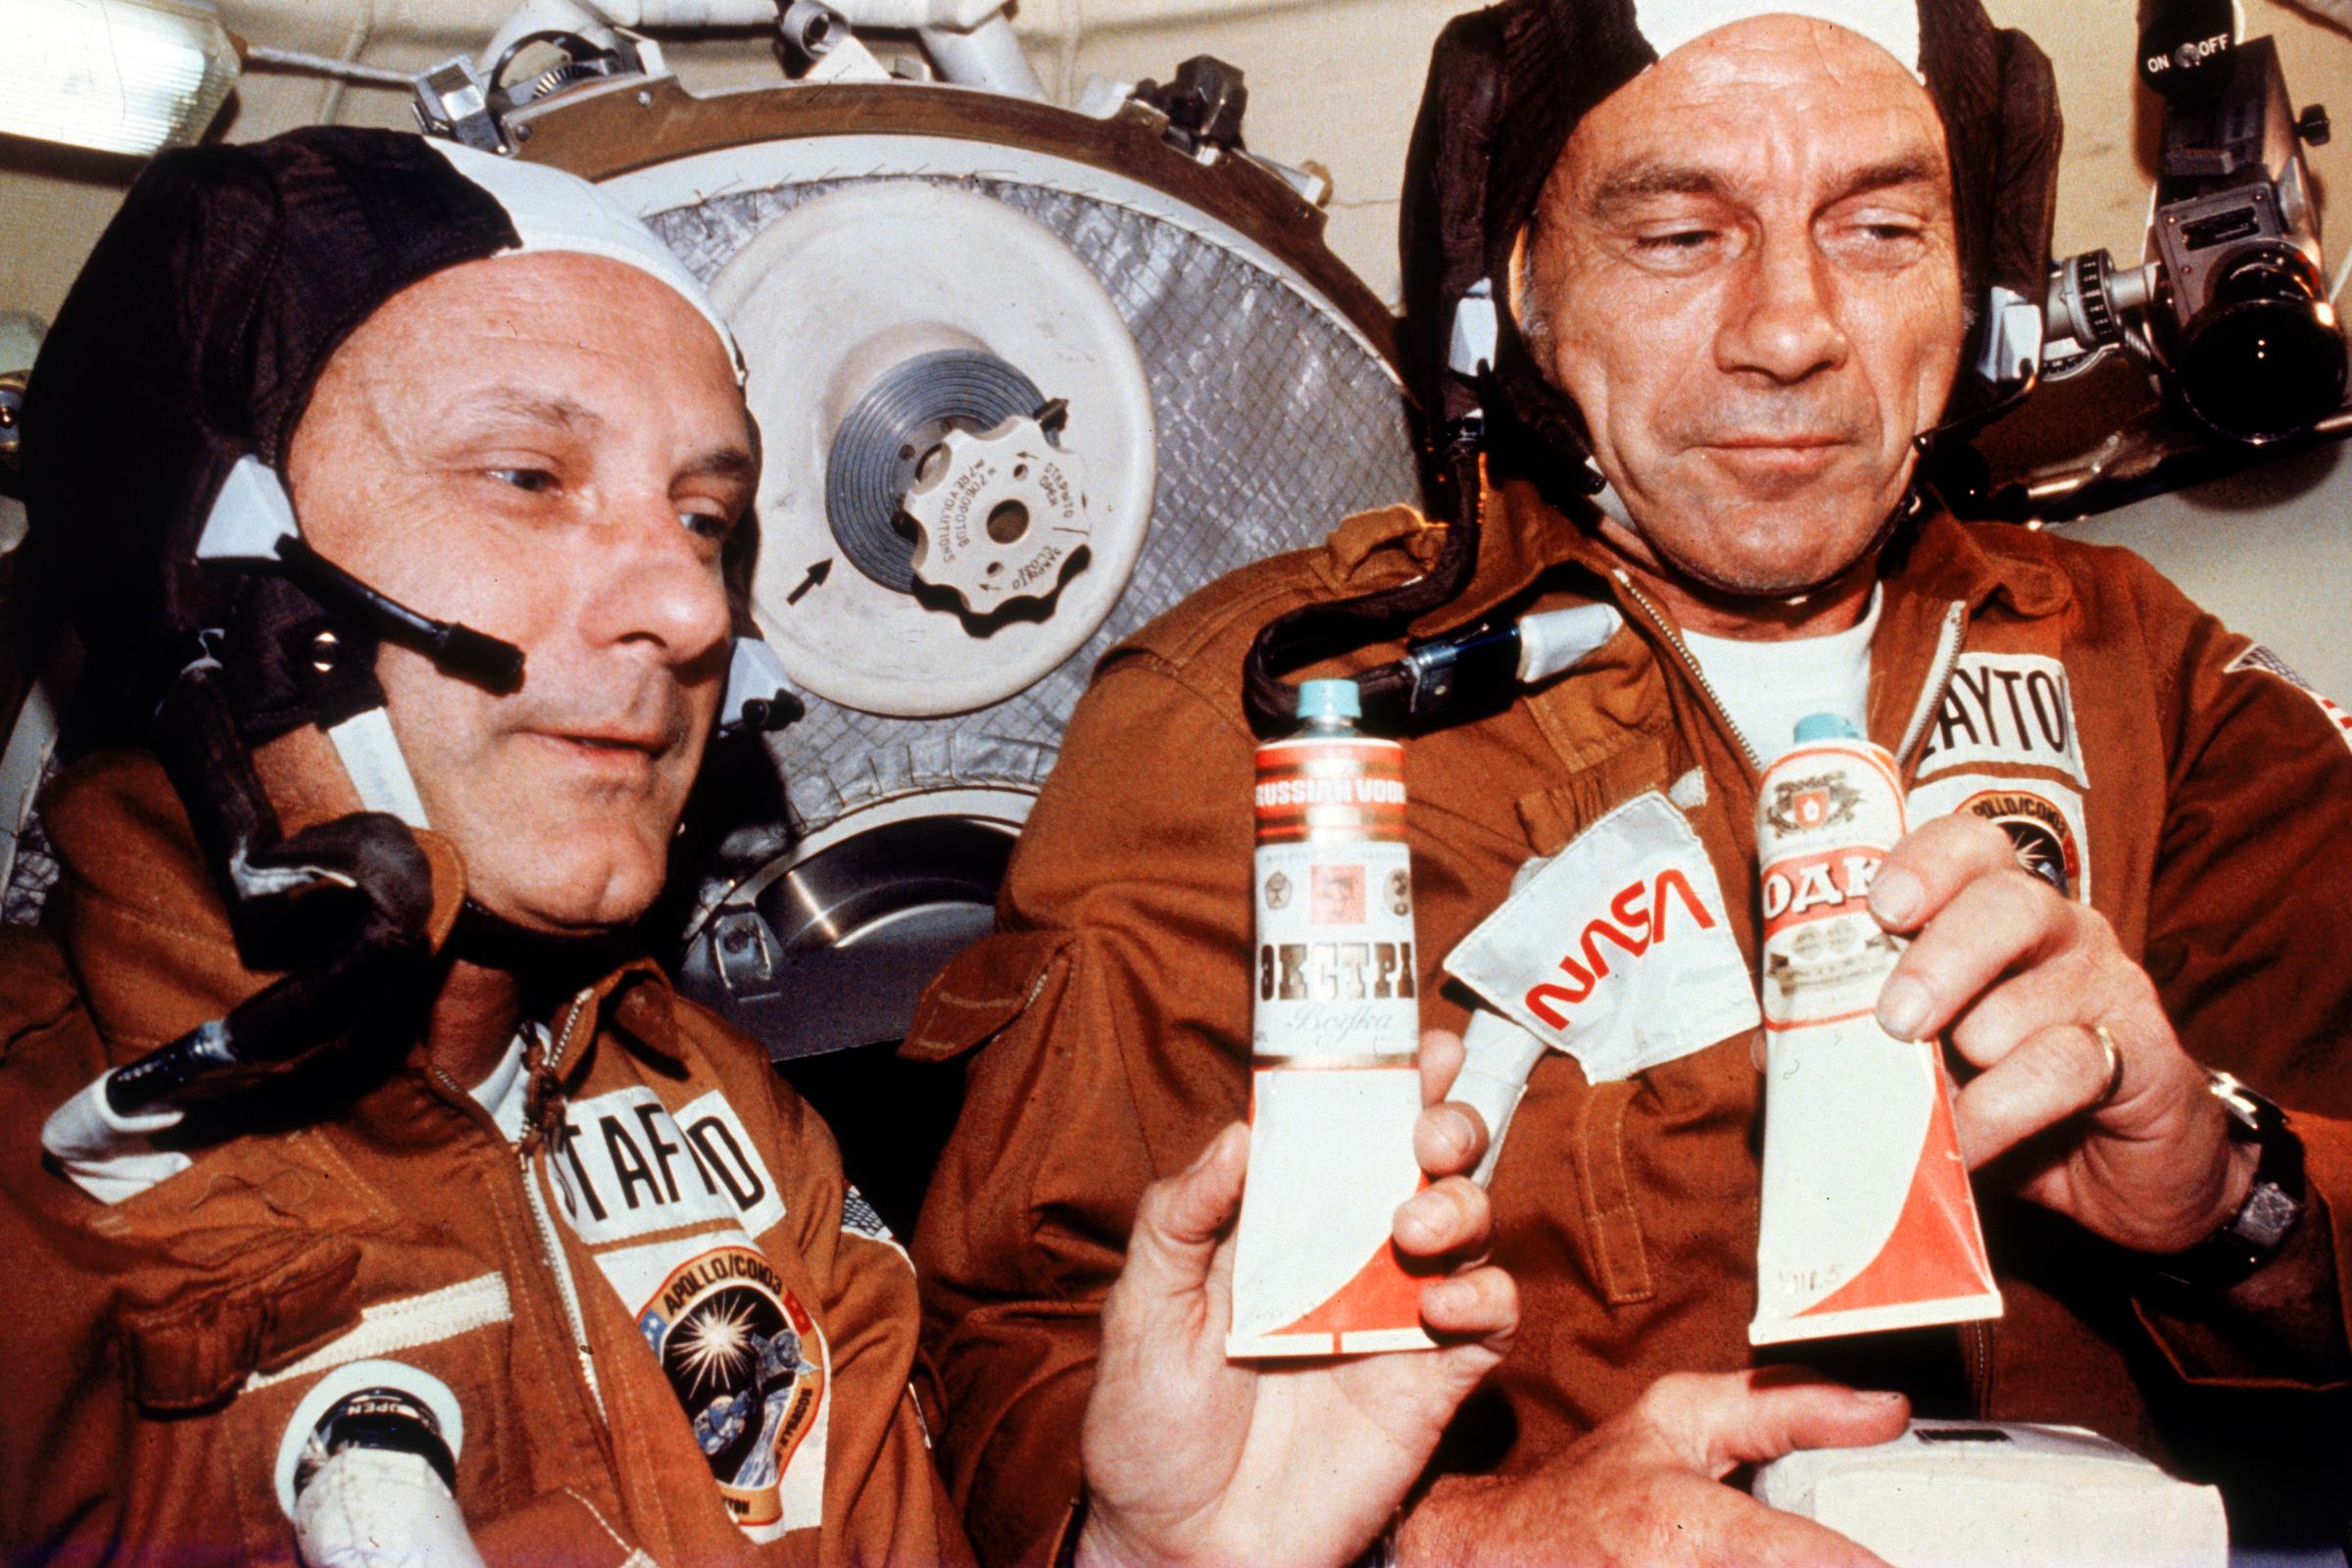 American astronauts Tom Stafford and Deke Slayton hold tubes of vodka given to them by Russian cosmonauts during their historic rendezvous and linkup of Apollo and Soyuz spacecraft.